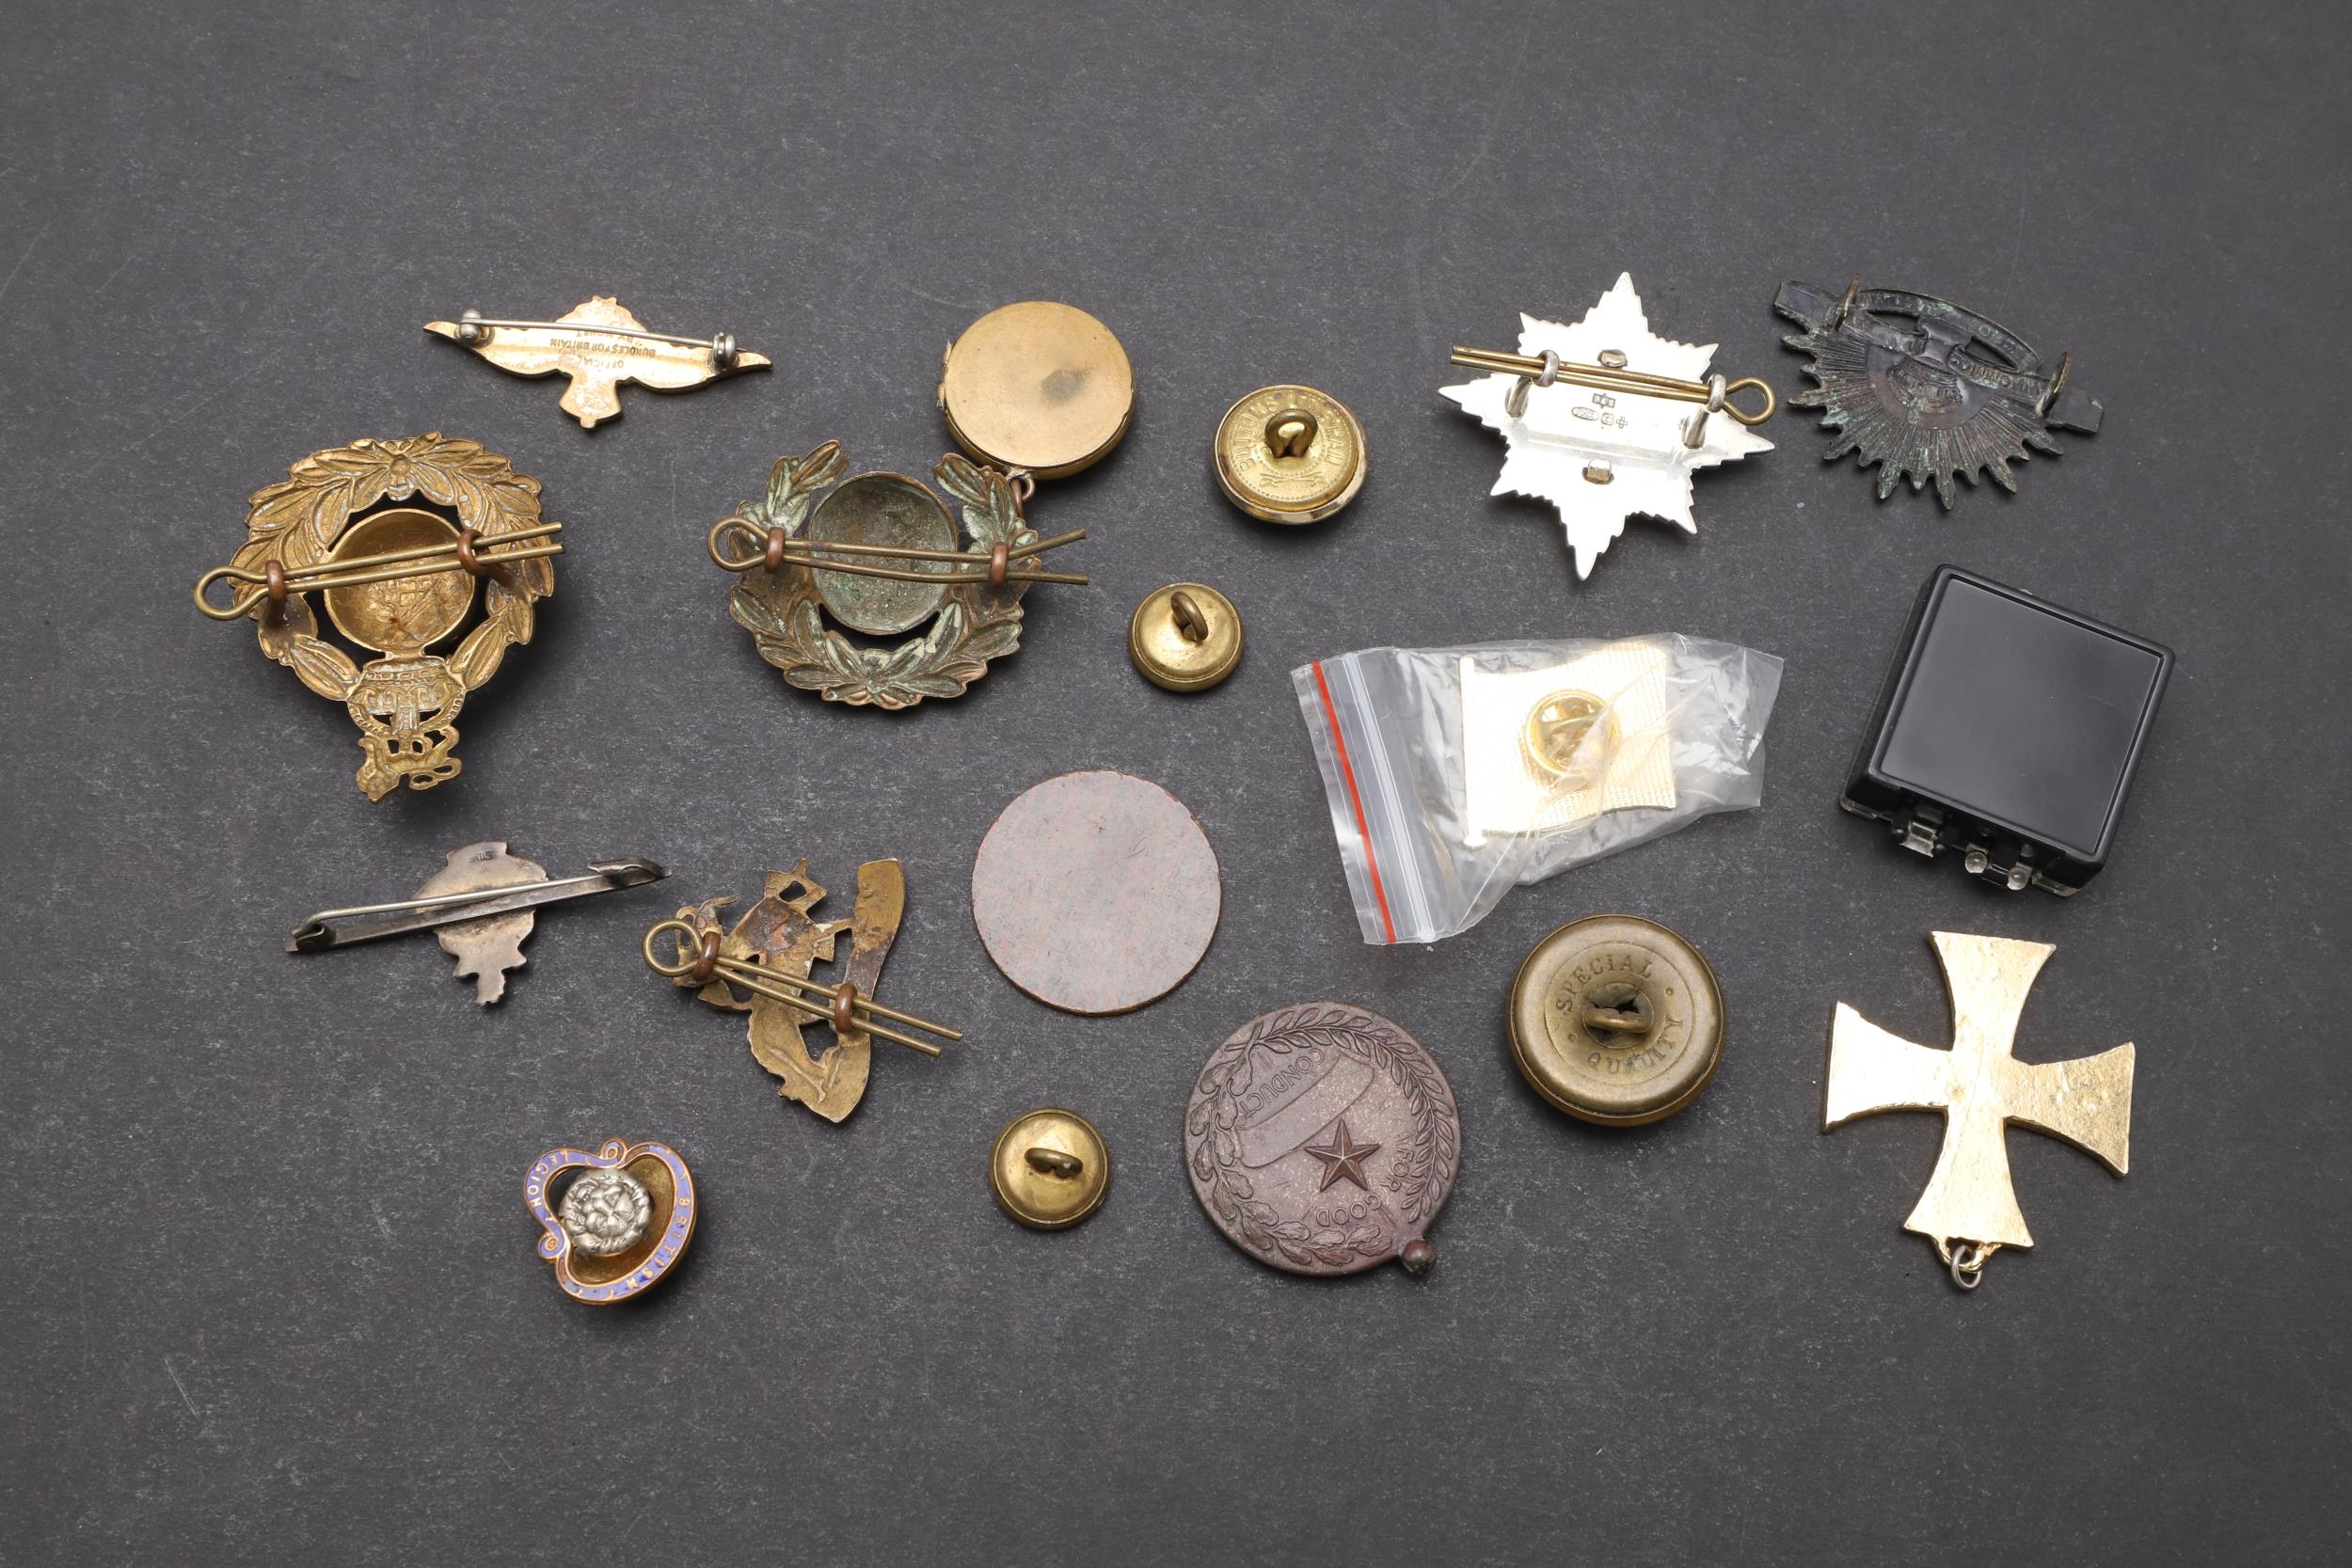 AN INTERESTING COLLECTION OF MILITARY BADGES, BUTTONS AND INSIGNIA. - Image 9 of 9